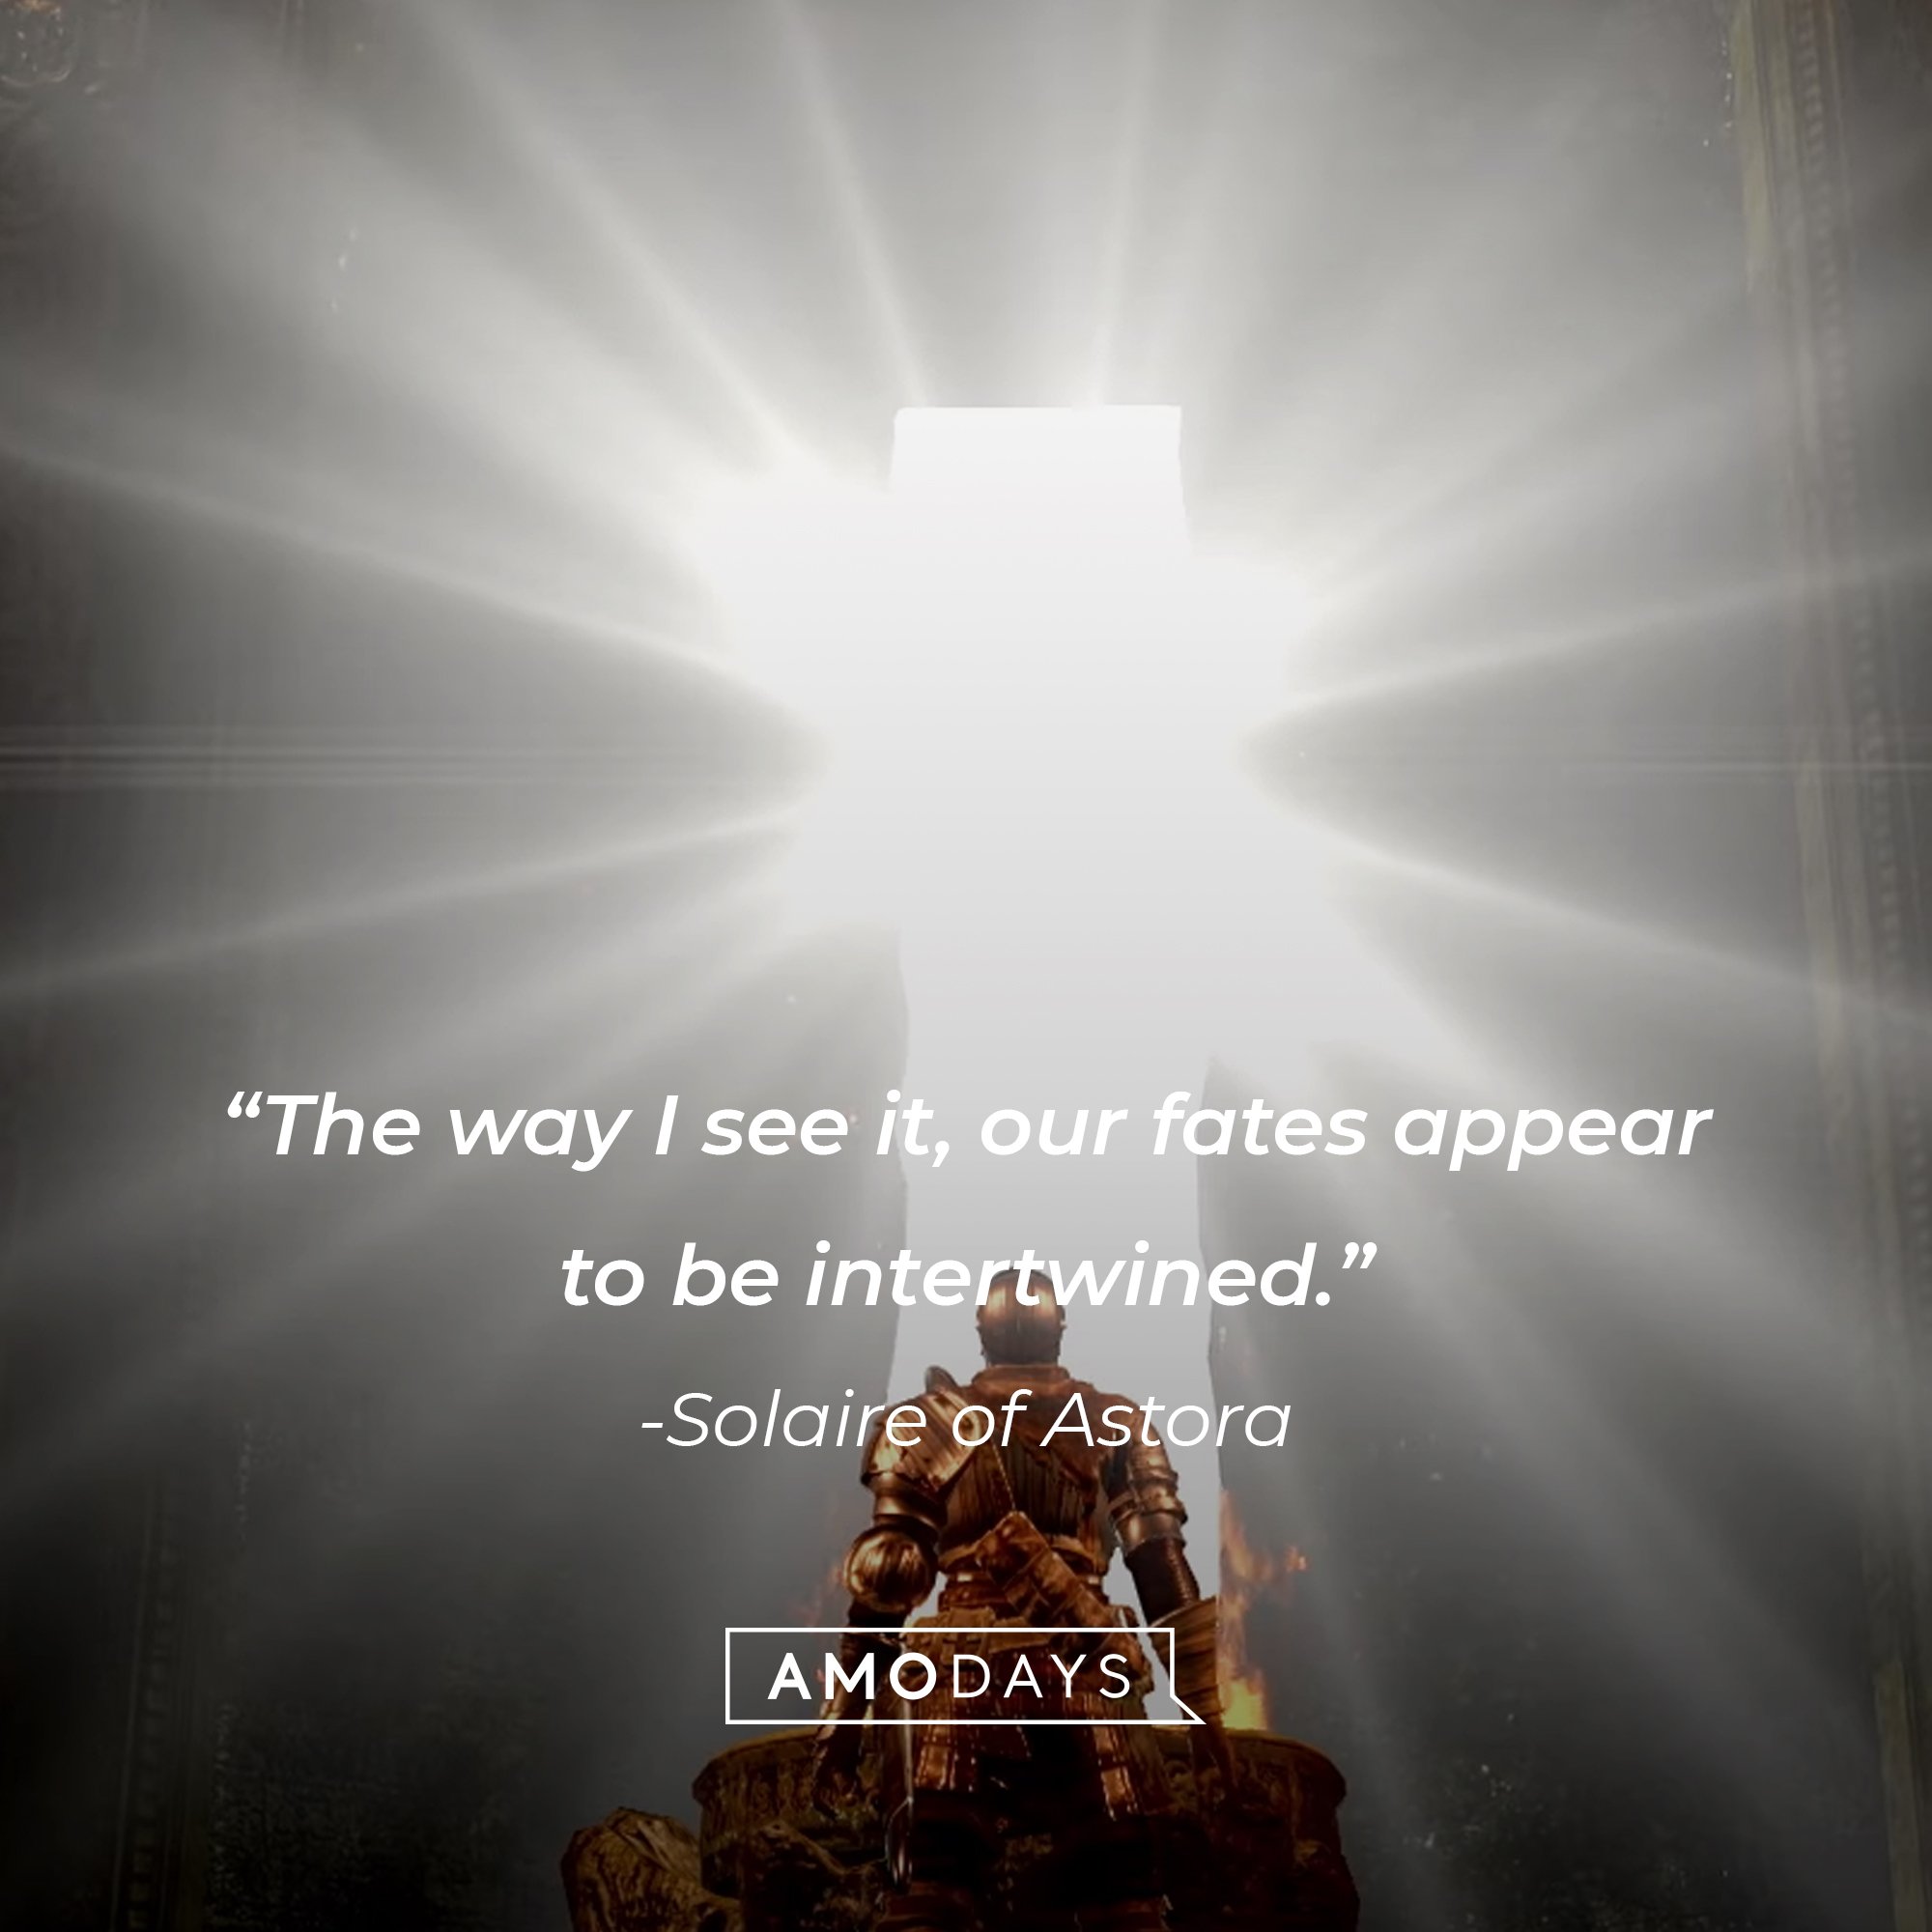 Solaire of Astora’s quote: "The way I see it, our fates appear to be intertwined."  | Image: AmoDays